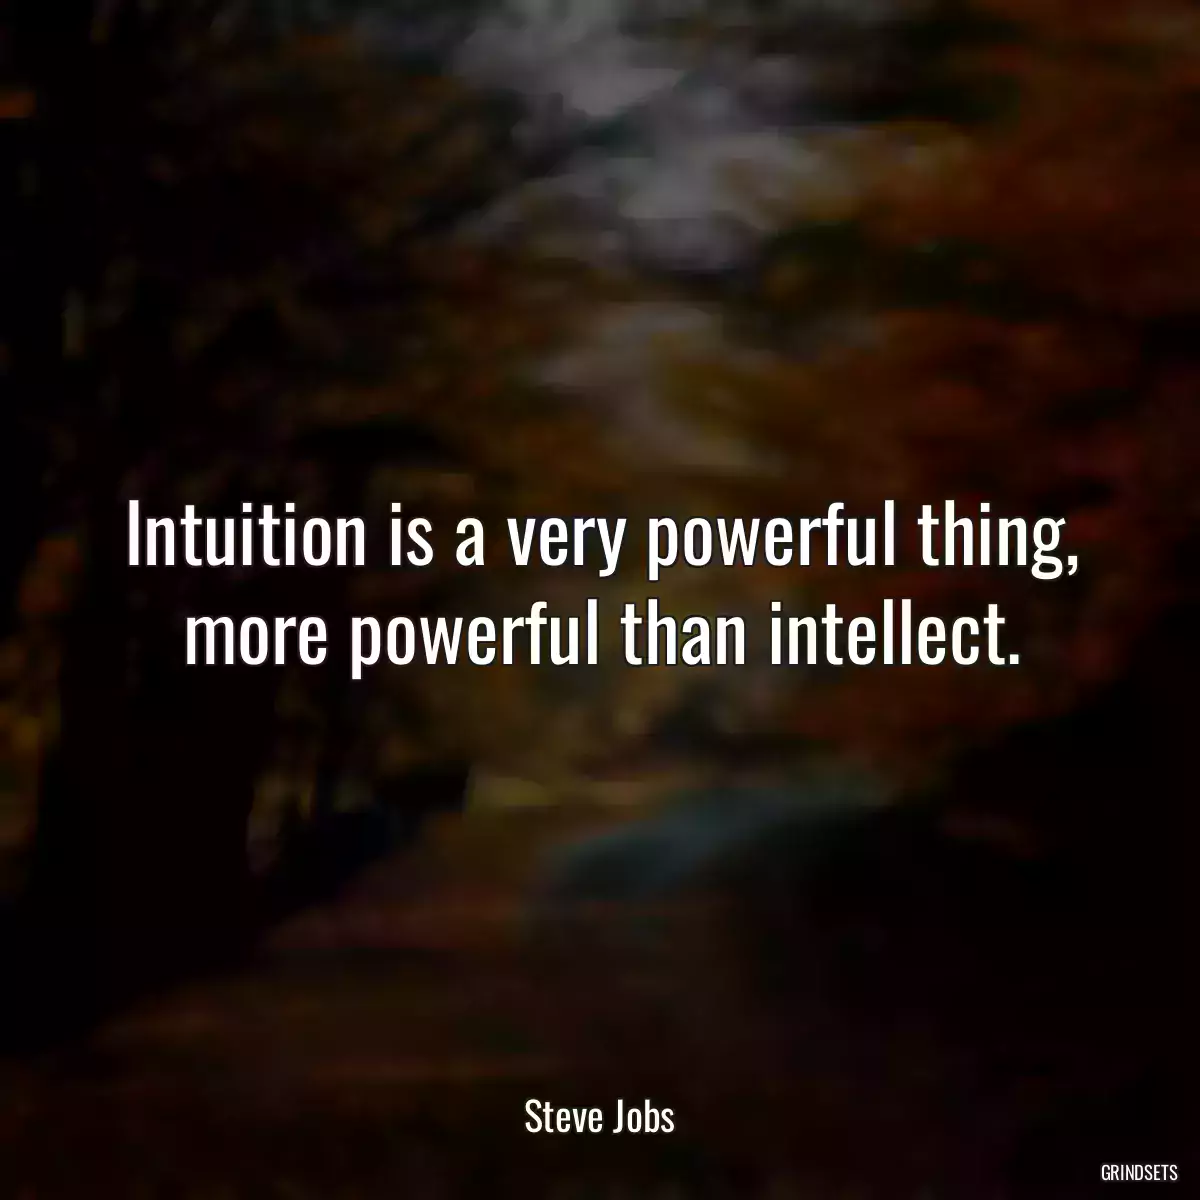 Intuition is a very powerful thing, more powerful than intellect.